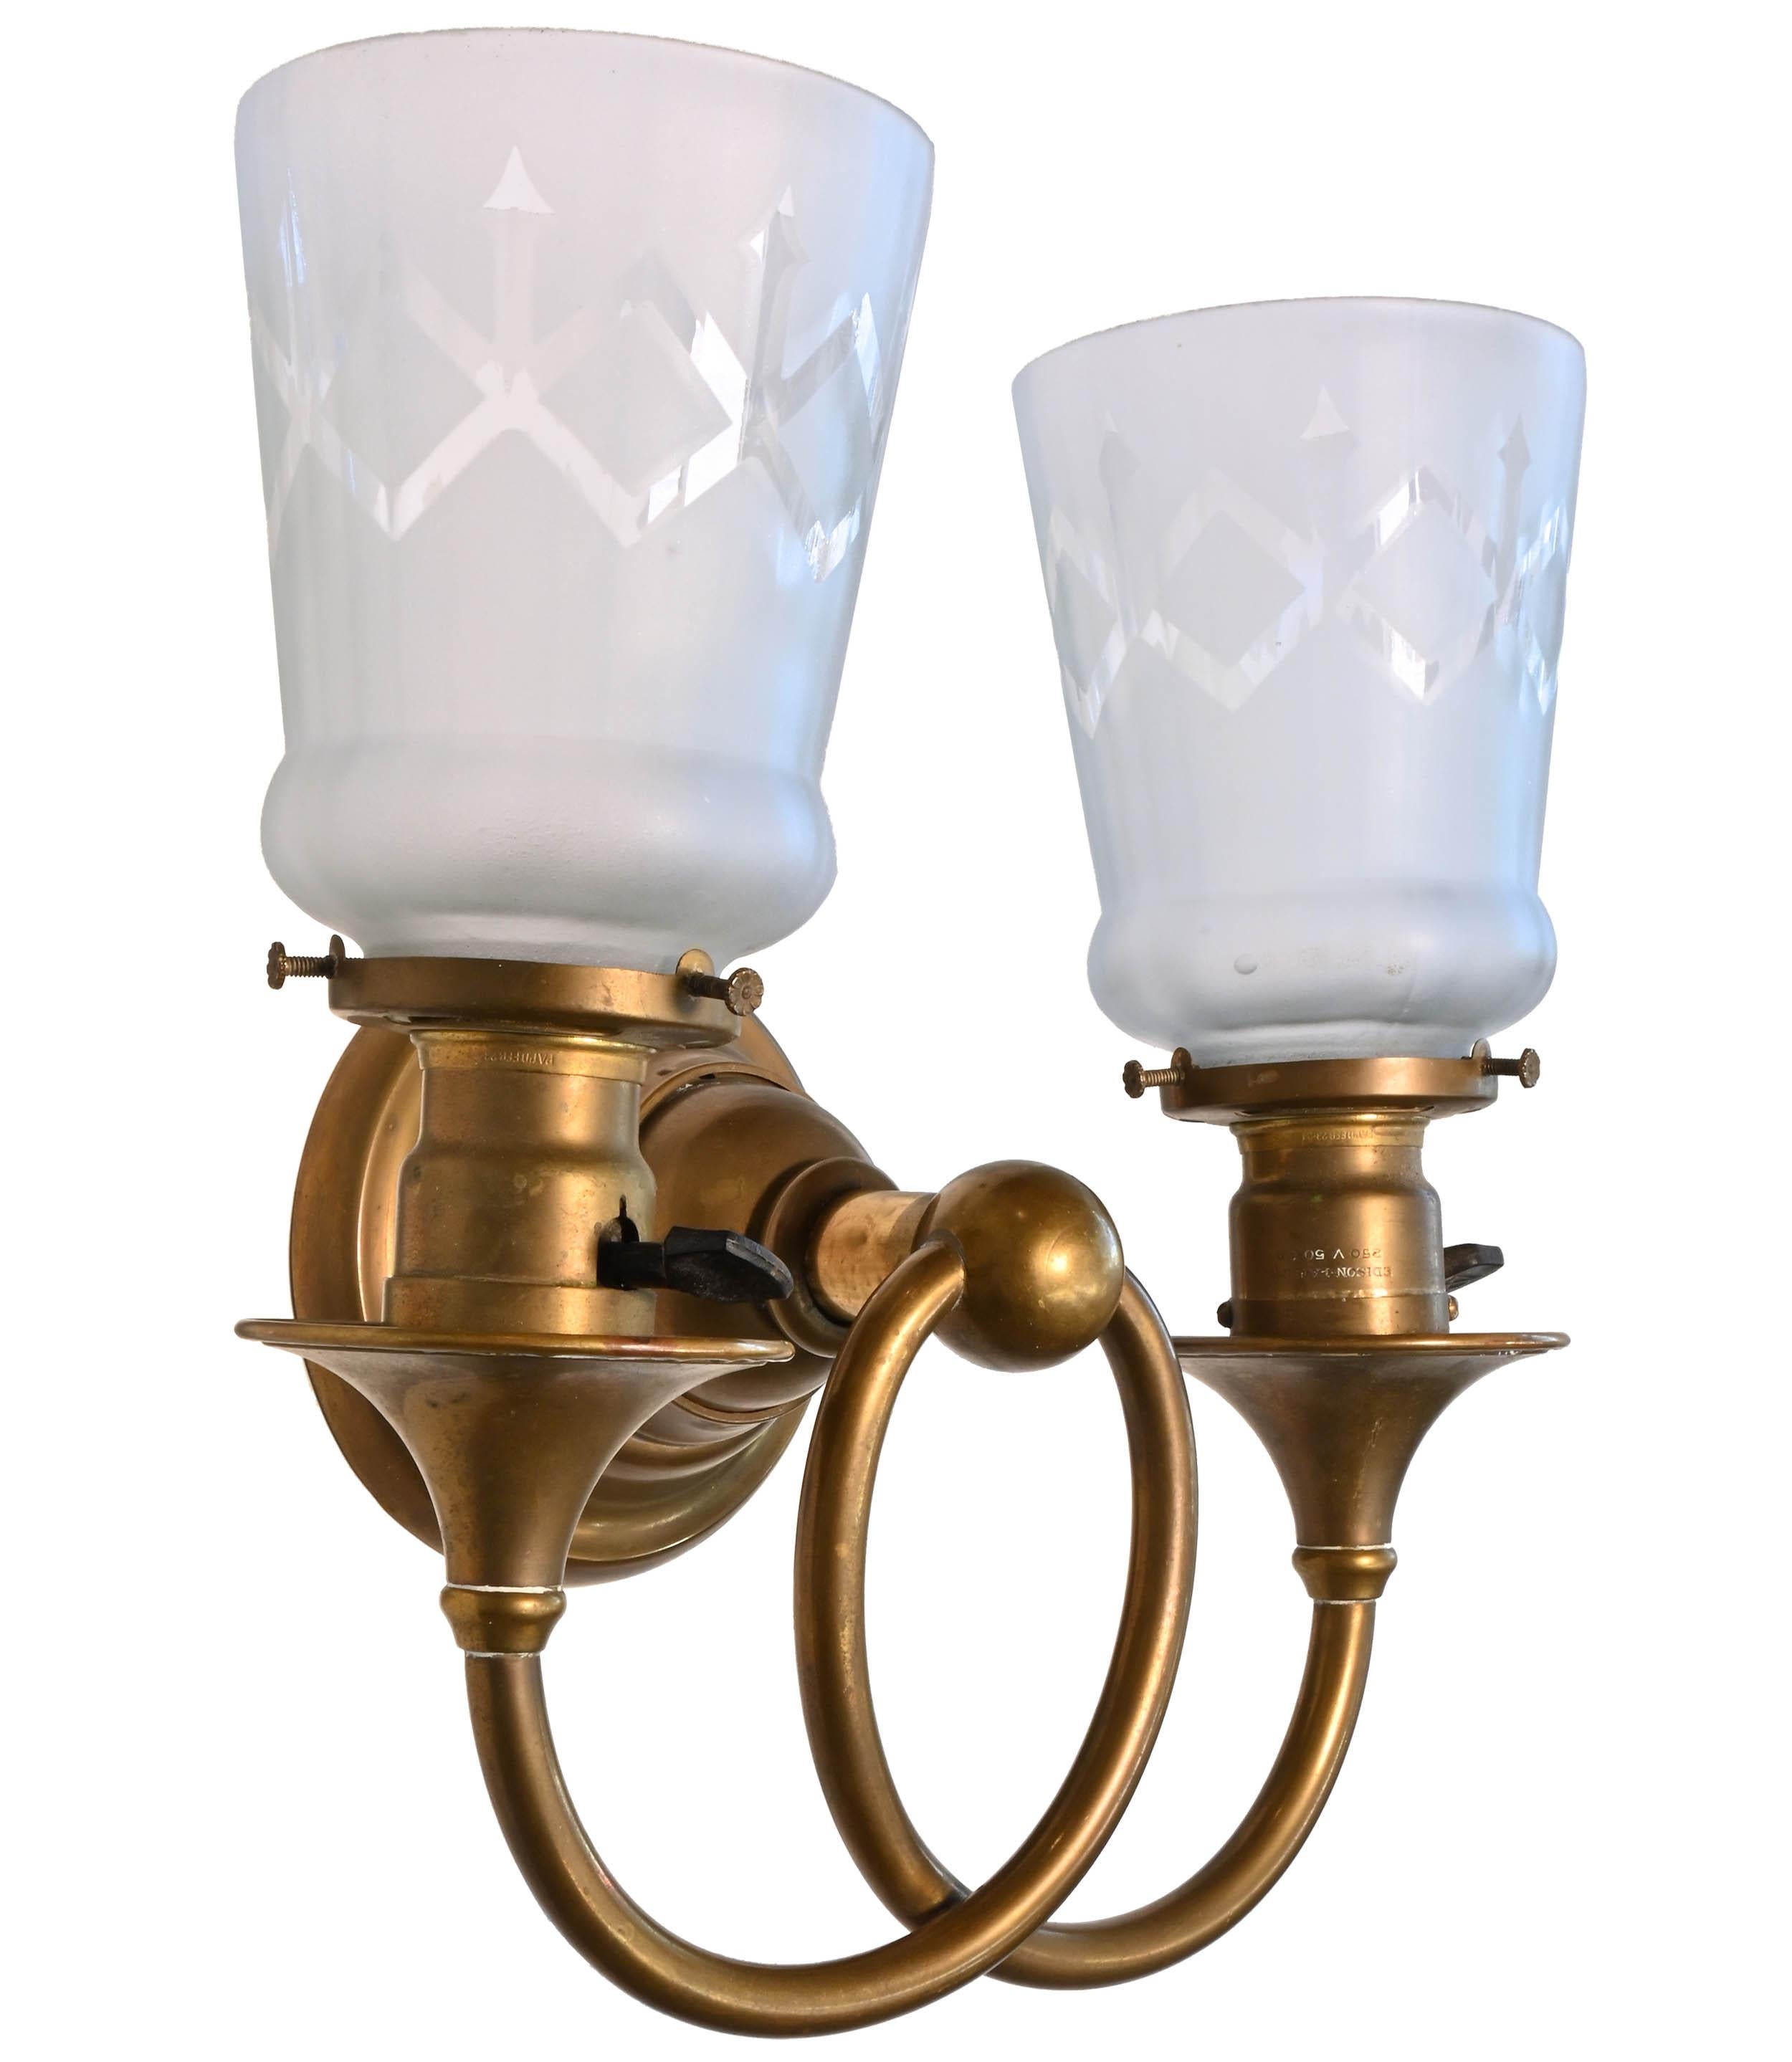 One of the sconces has a different style backplate, see photos,

Circa 1910s
Condition: Age consistent & very good
Material: Brass & Hand Etched Shades
Finish: Original
Country of origin: USA
Illumination: 2 standard Edison socket